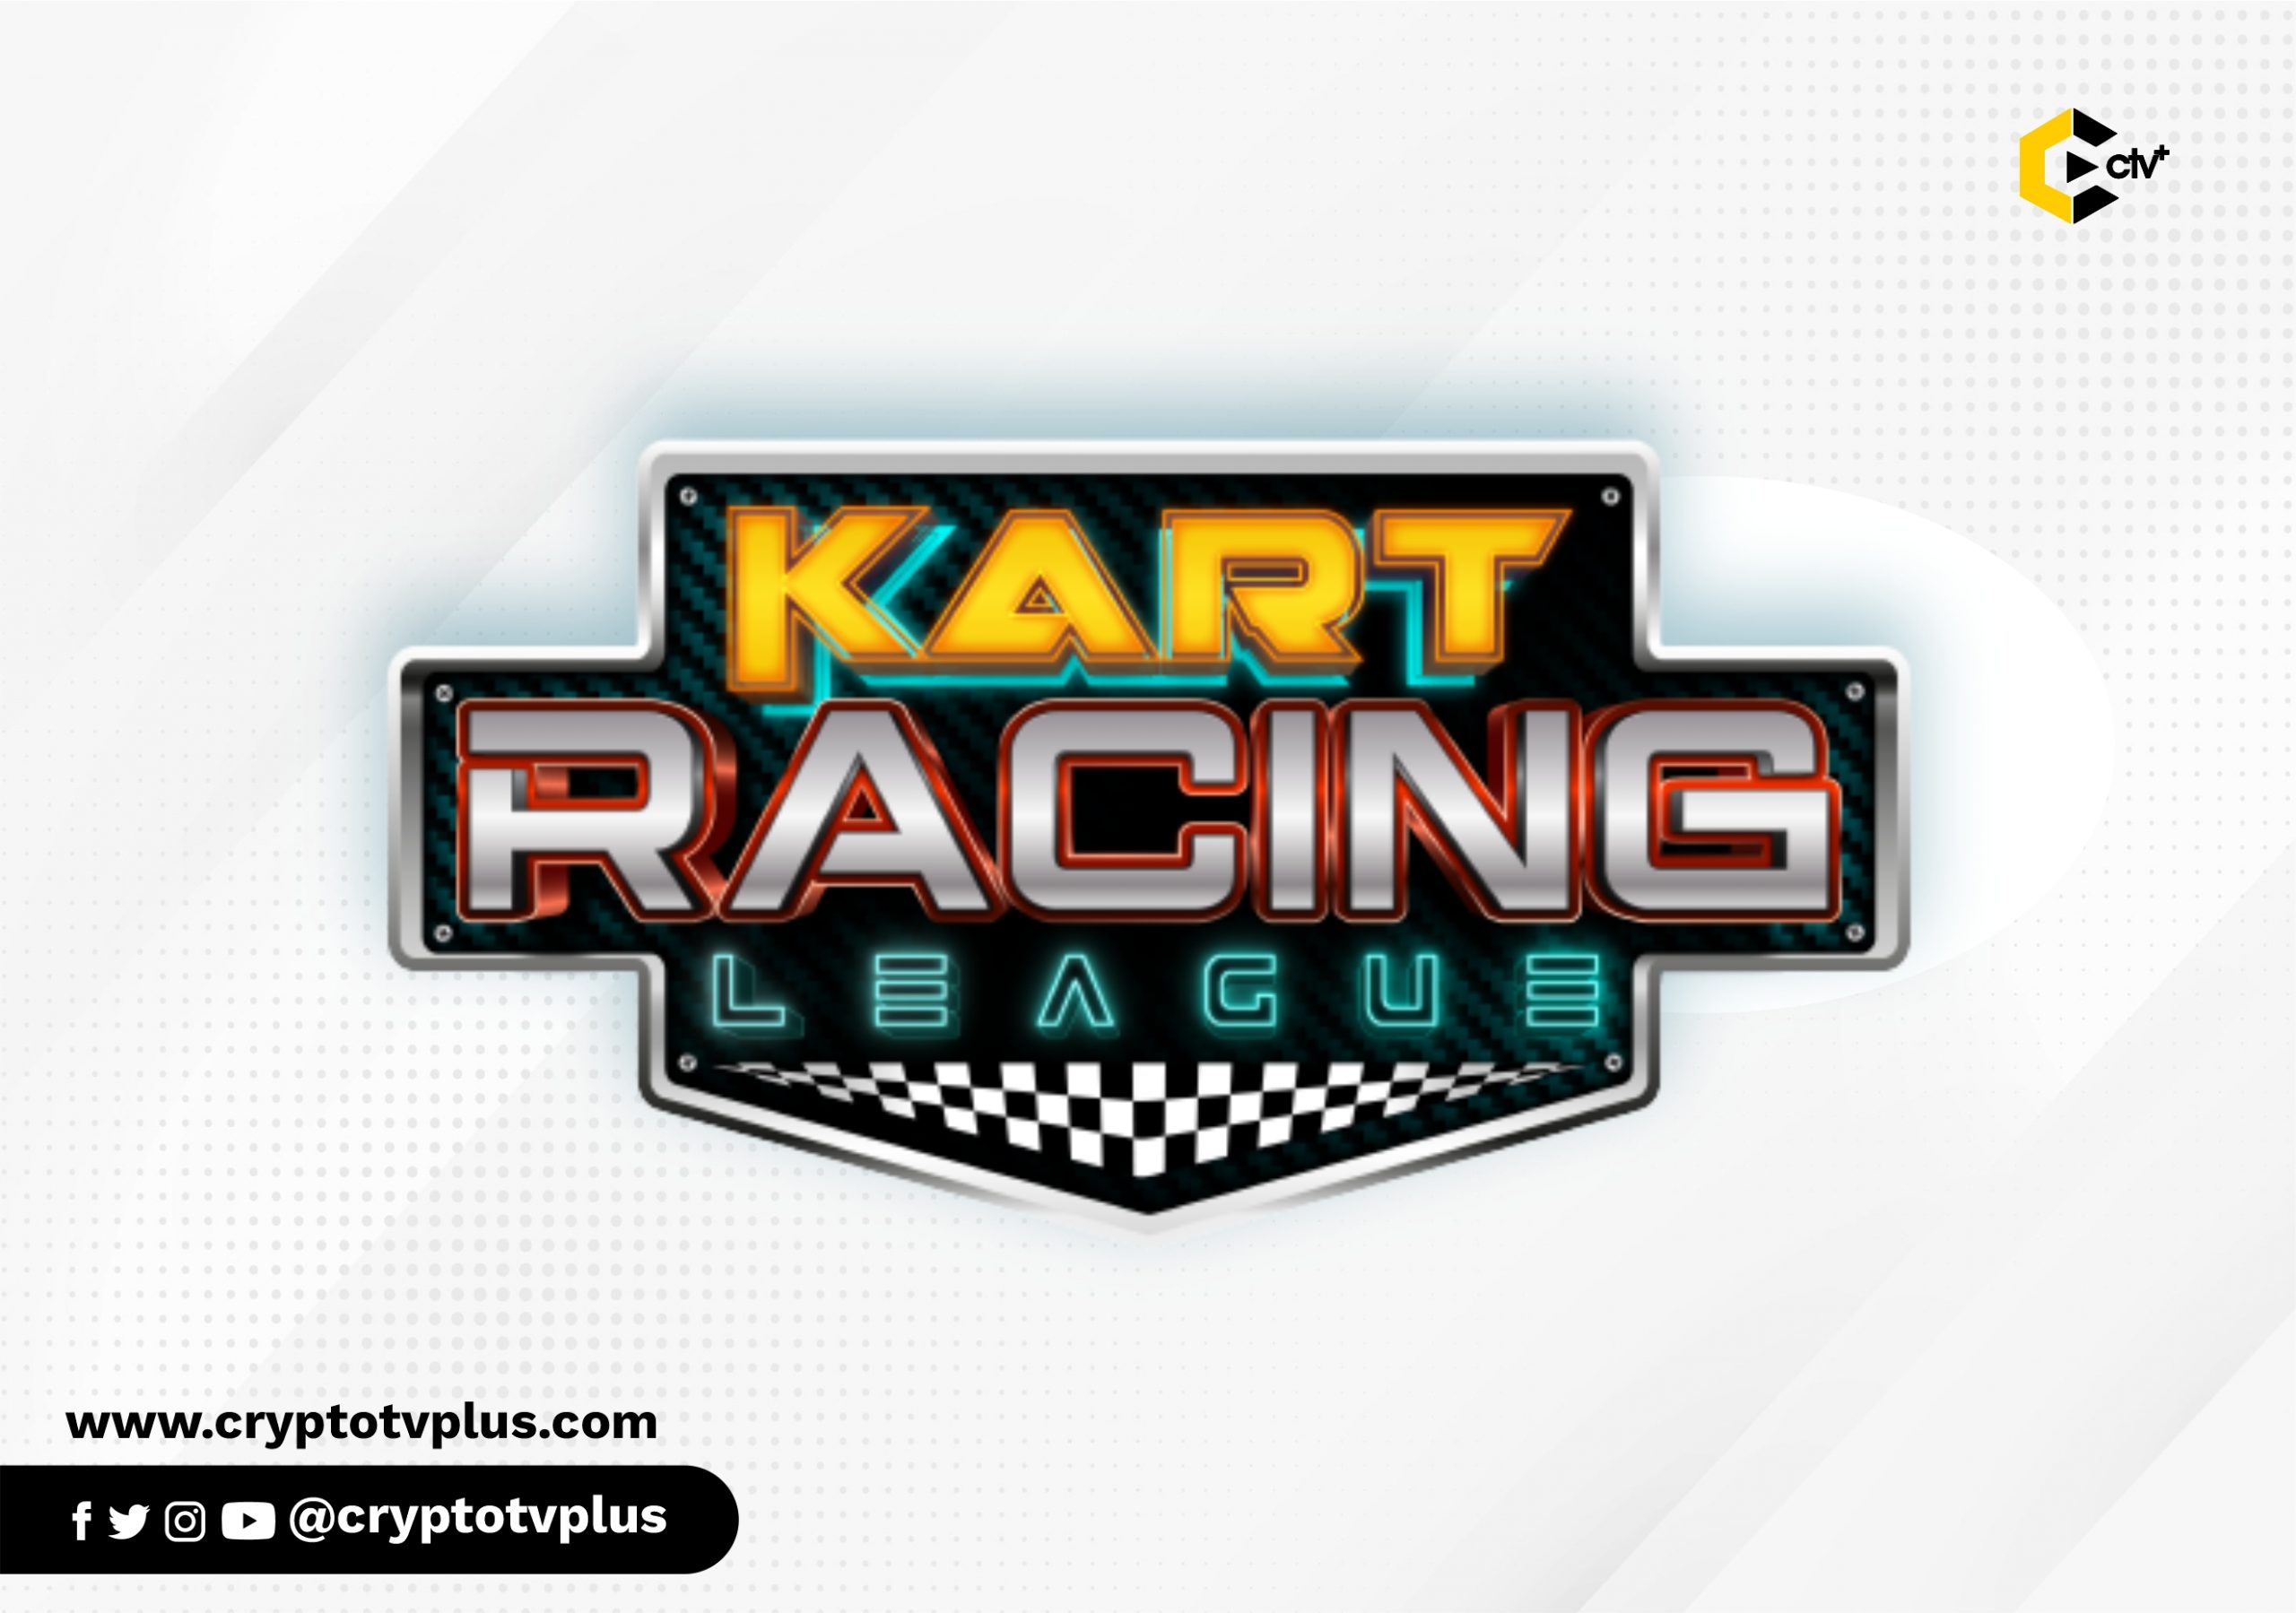 Kart Racing League: A Mario Kart-styled play-to-earn NFT game

